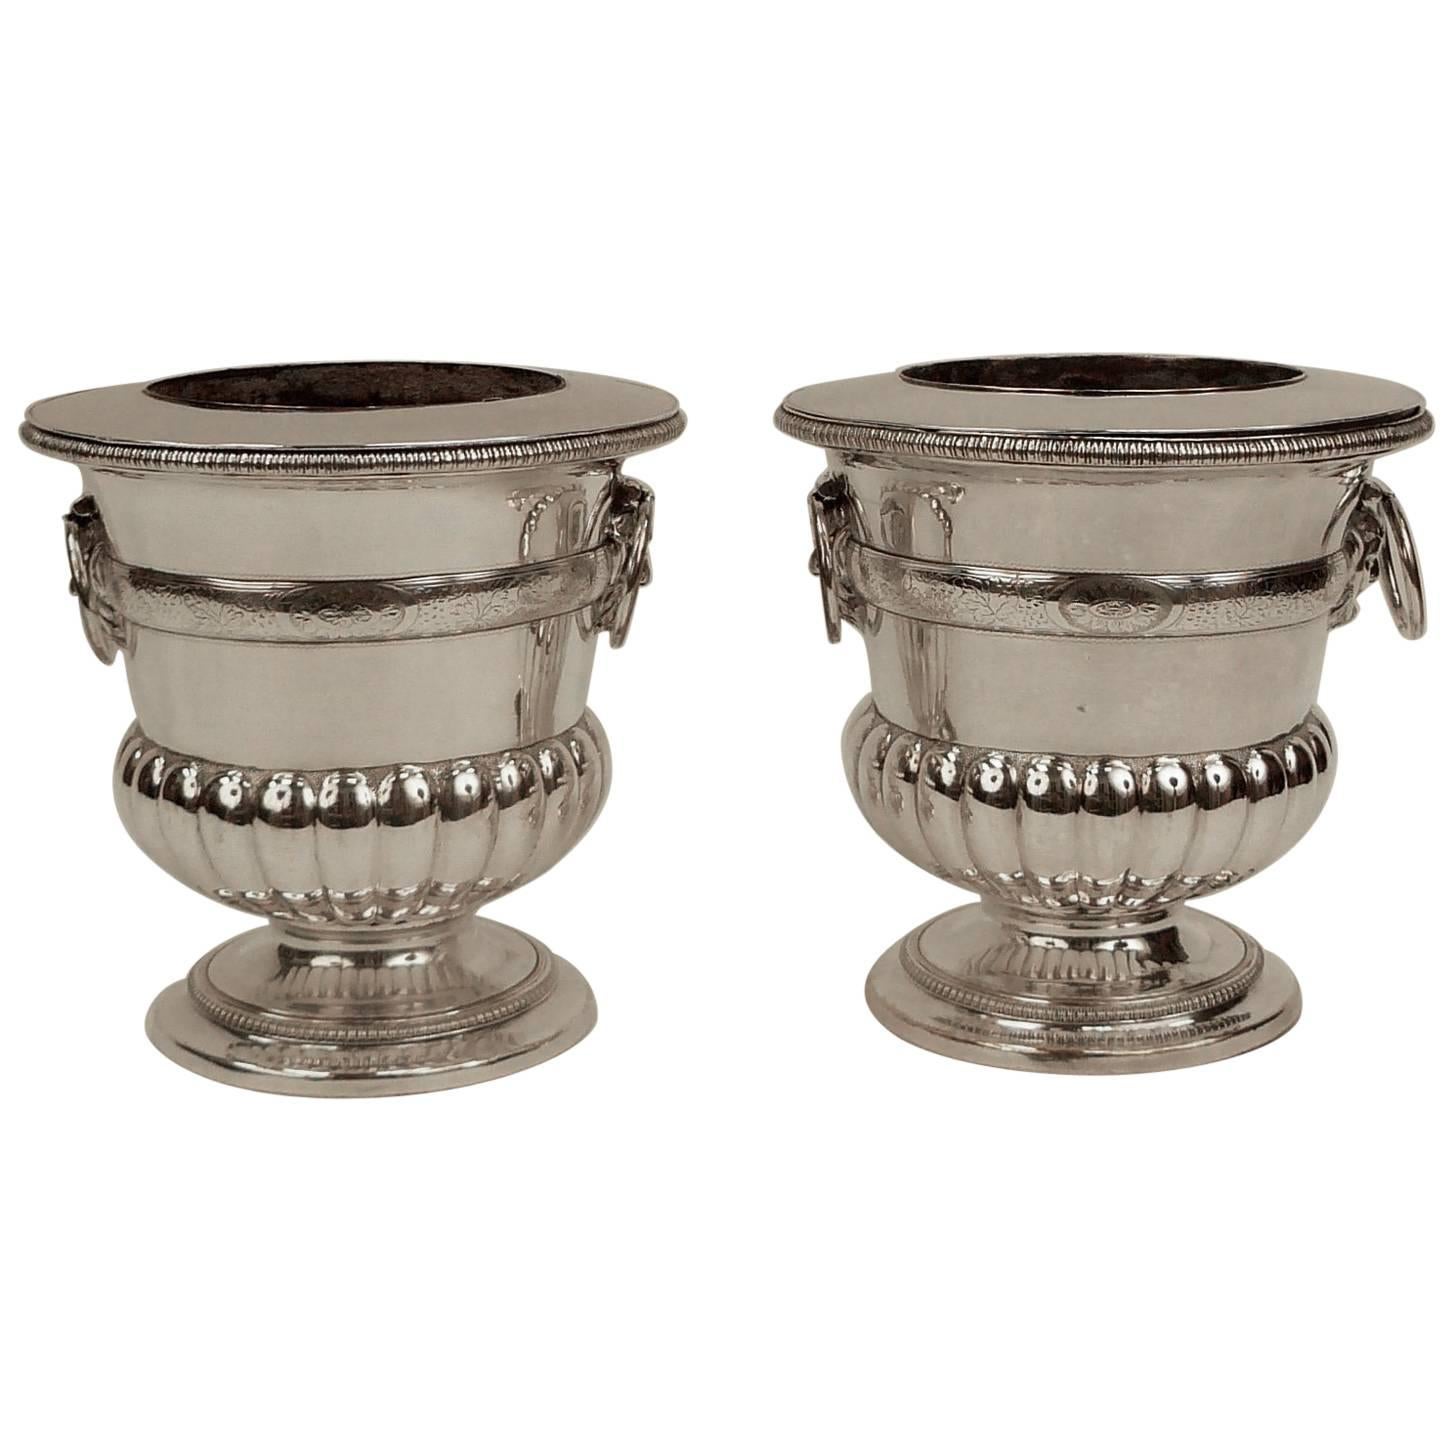 Pair of English George III Old Sheffield Plated Wine Coolers, circa 1790